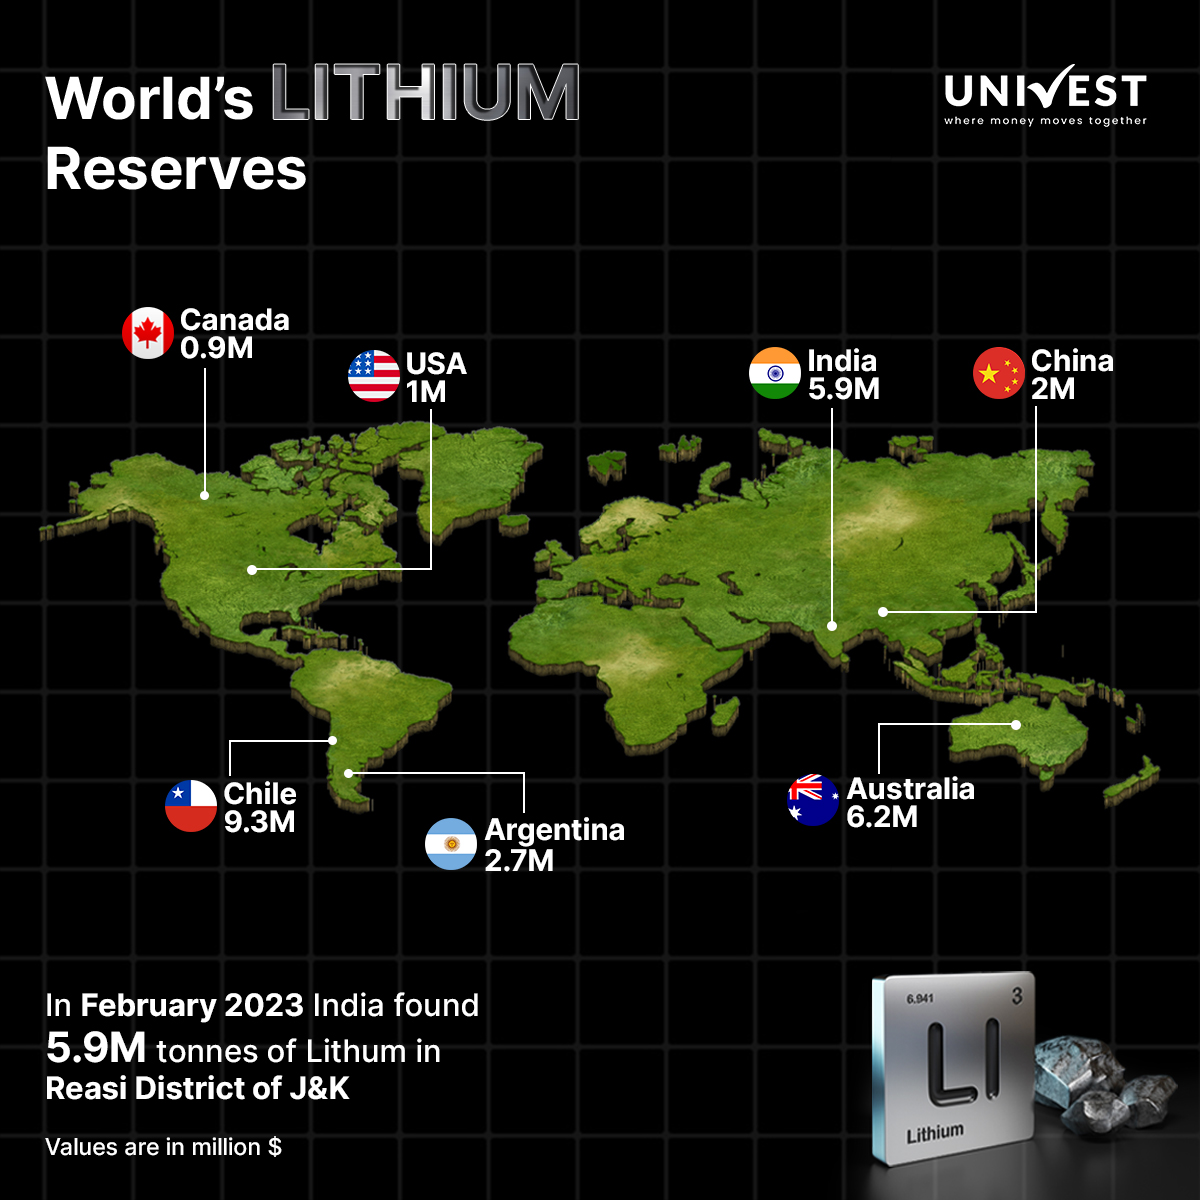 India recently made a landmark announcement on February 9th, revealing the discovery of its largest deposits of lithium to date. Download the Univest app for more such market updates!

#InvestWithUnivest #LithiumDiscovery #India #ReasiDistrict #JammuAndKashmir #WhiteGold